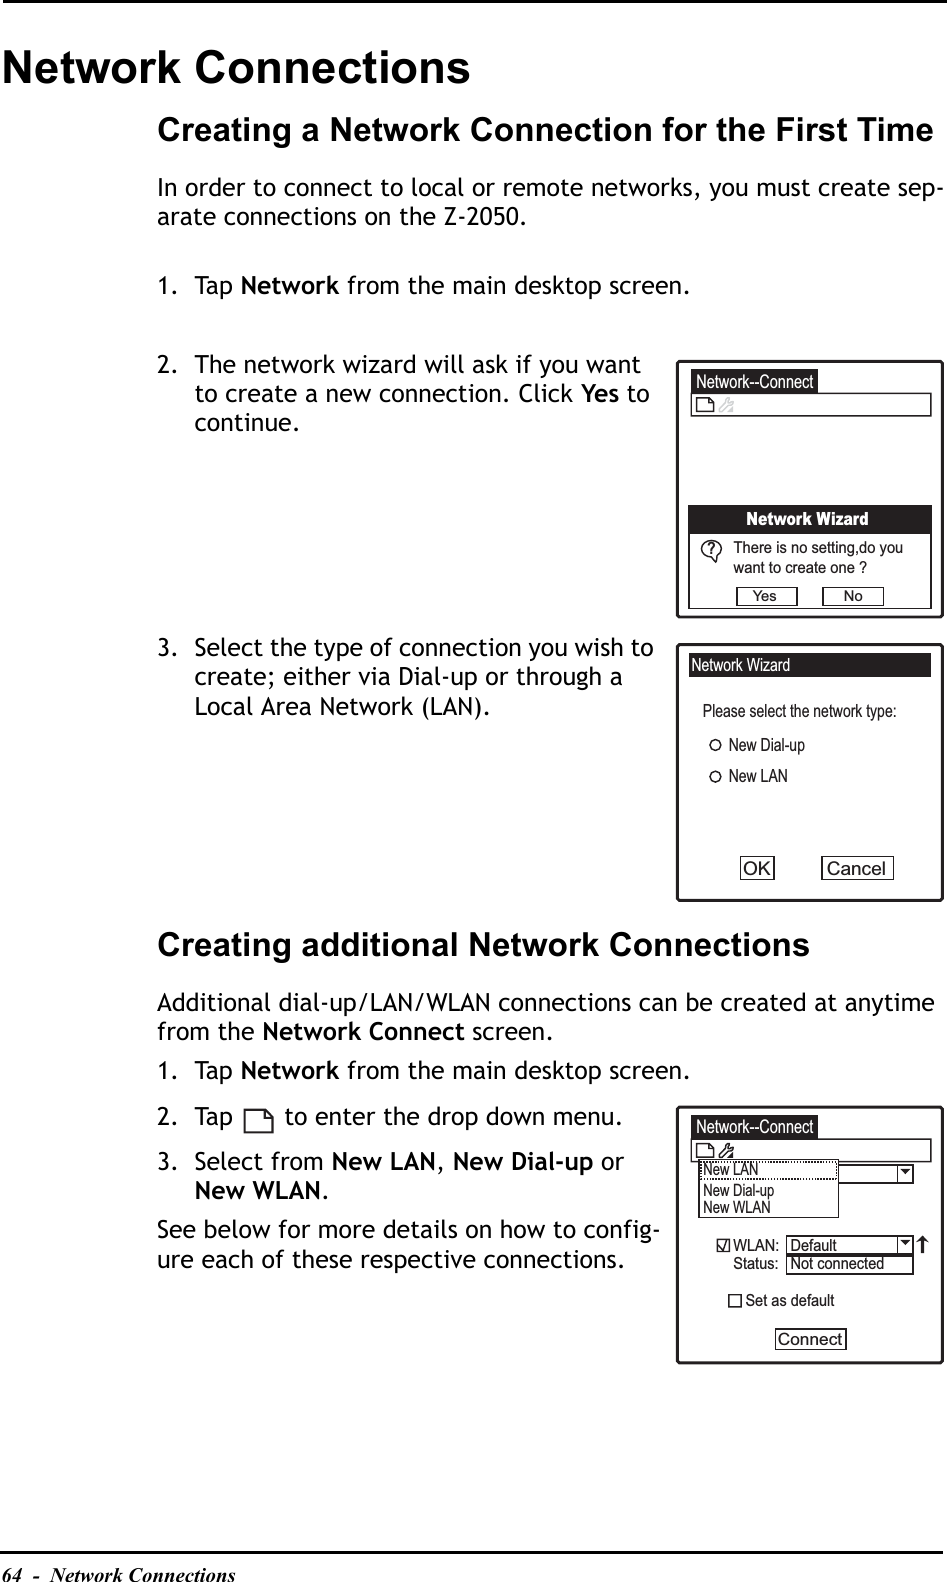 64  -  Network ConnectionsNetwork ConnectionsCreating a Network Connection for the First TimeIn order to connect to local or remote networks, you must create sep-arate connections on the Z-2050.1. Tap Network from the main desktop screen.2. The network wizard will ask if you want to create a new connection. Click Yes to continue.3. Select the type of connection you wish to create; either via Dial-up or through a Local Area Network (LAN).Creating additional Network ConnectionsAdditional dial-up/LAN/WLAN connections can be created at anytime from the Network Connect screen.1. Tap Network from the main desktop screen.2. Tap   to enter the drop down menu.3. Select from New LAN,New Dial-up or New WLAN.See below for more details on how to config-ure each of these respective connections.Network--ConnectNetwork WizardThere is no setting,do youwant to create one ?Yes N o?Network WizardPlease select the network type:New Dial-upNew LANCancelOKNetwork--ConnectNew LANNew Dial-upNew WLANWLAN:Status:   Set as defaultConnectDefaultNot connected